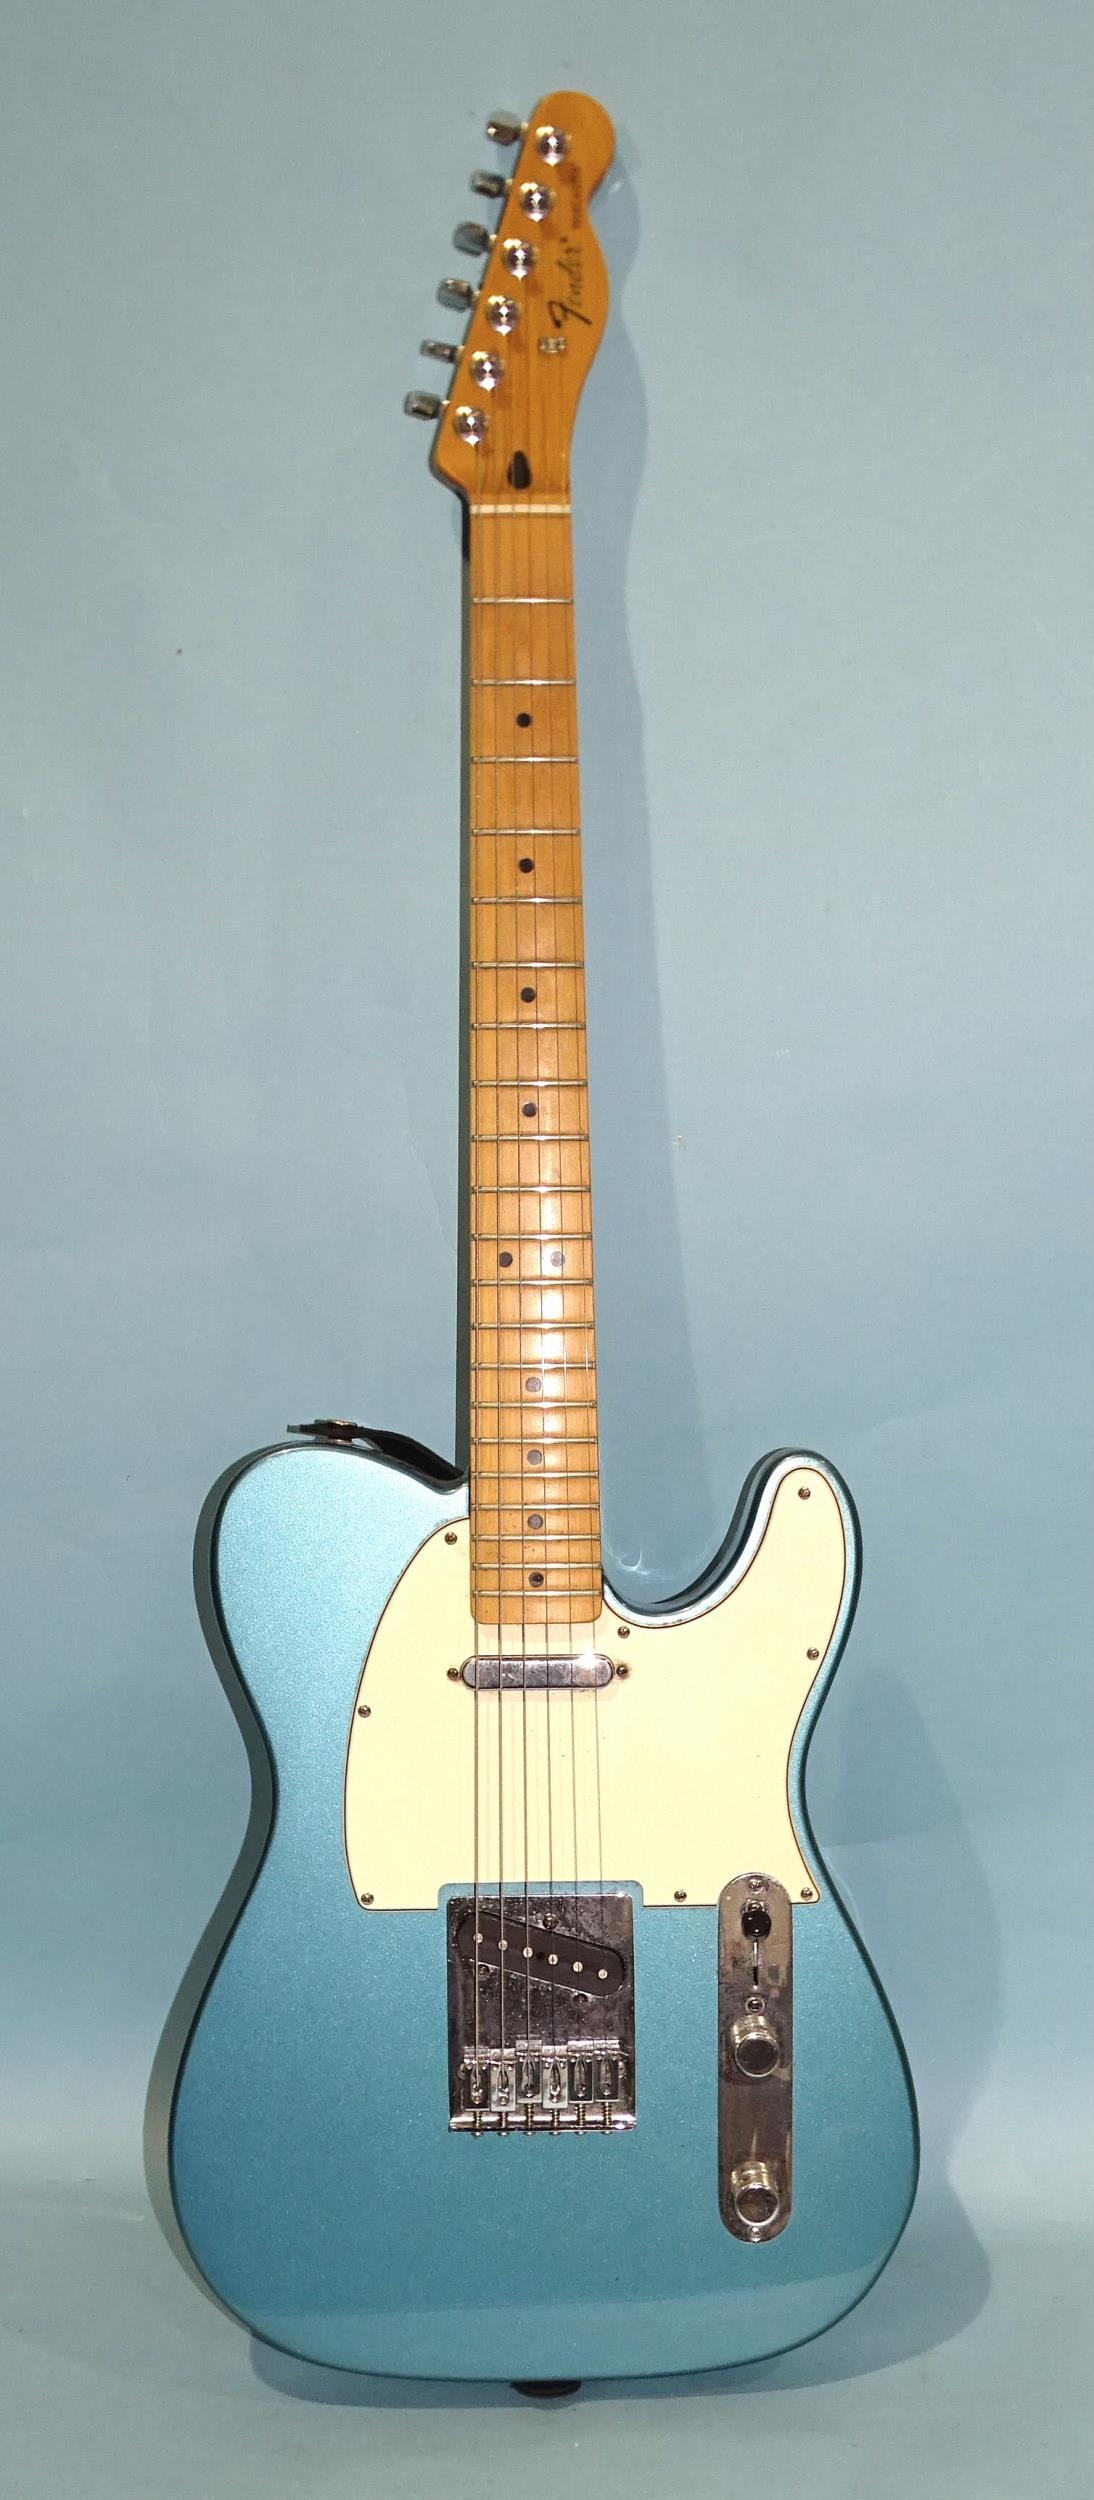 A similar guitar, made in Mexico, with blue and cream body, no.MZ9368219.